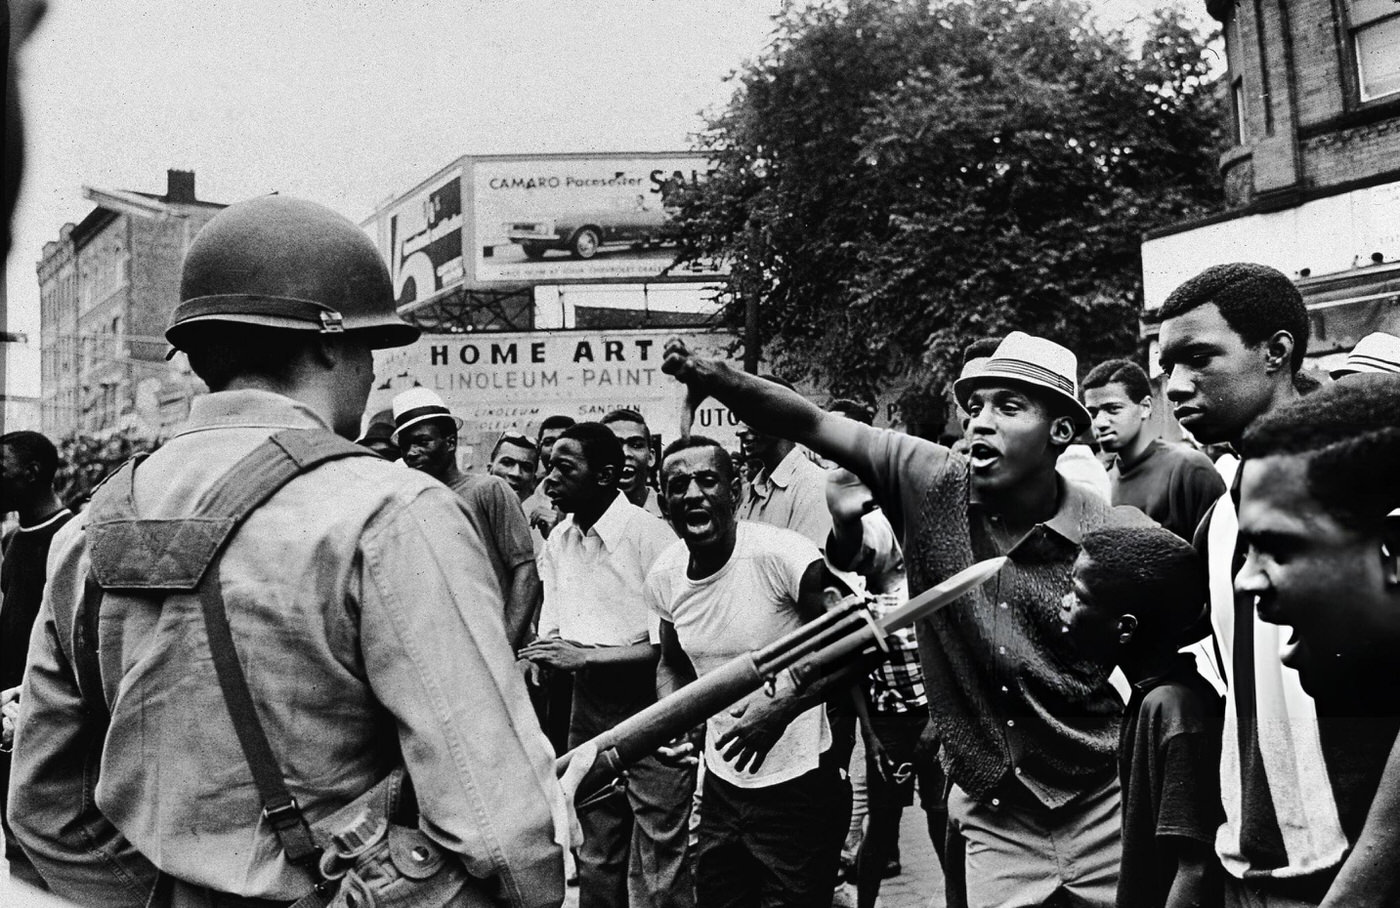 A Black man gestures with his thumb down to an armed National Guardman, during a protest